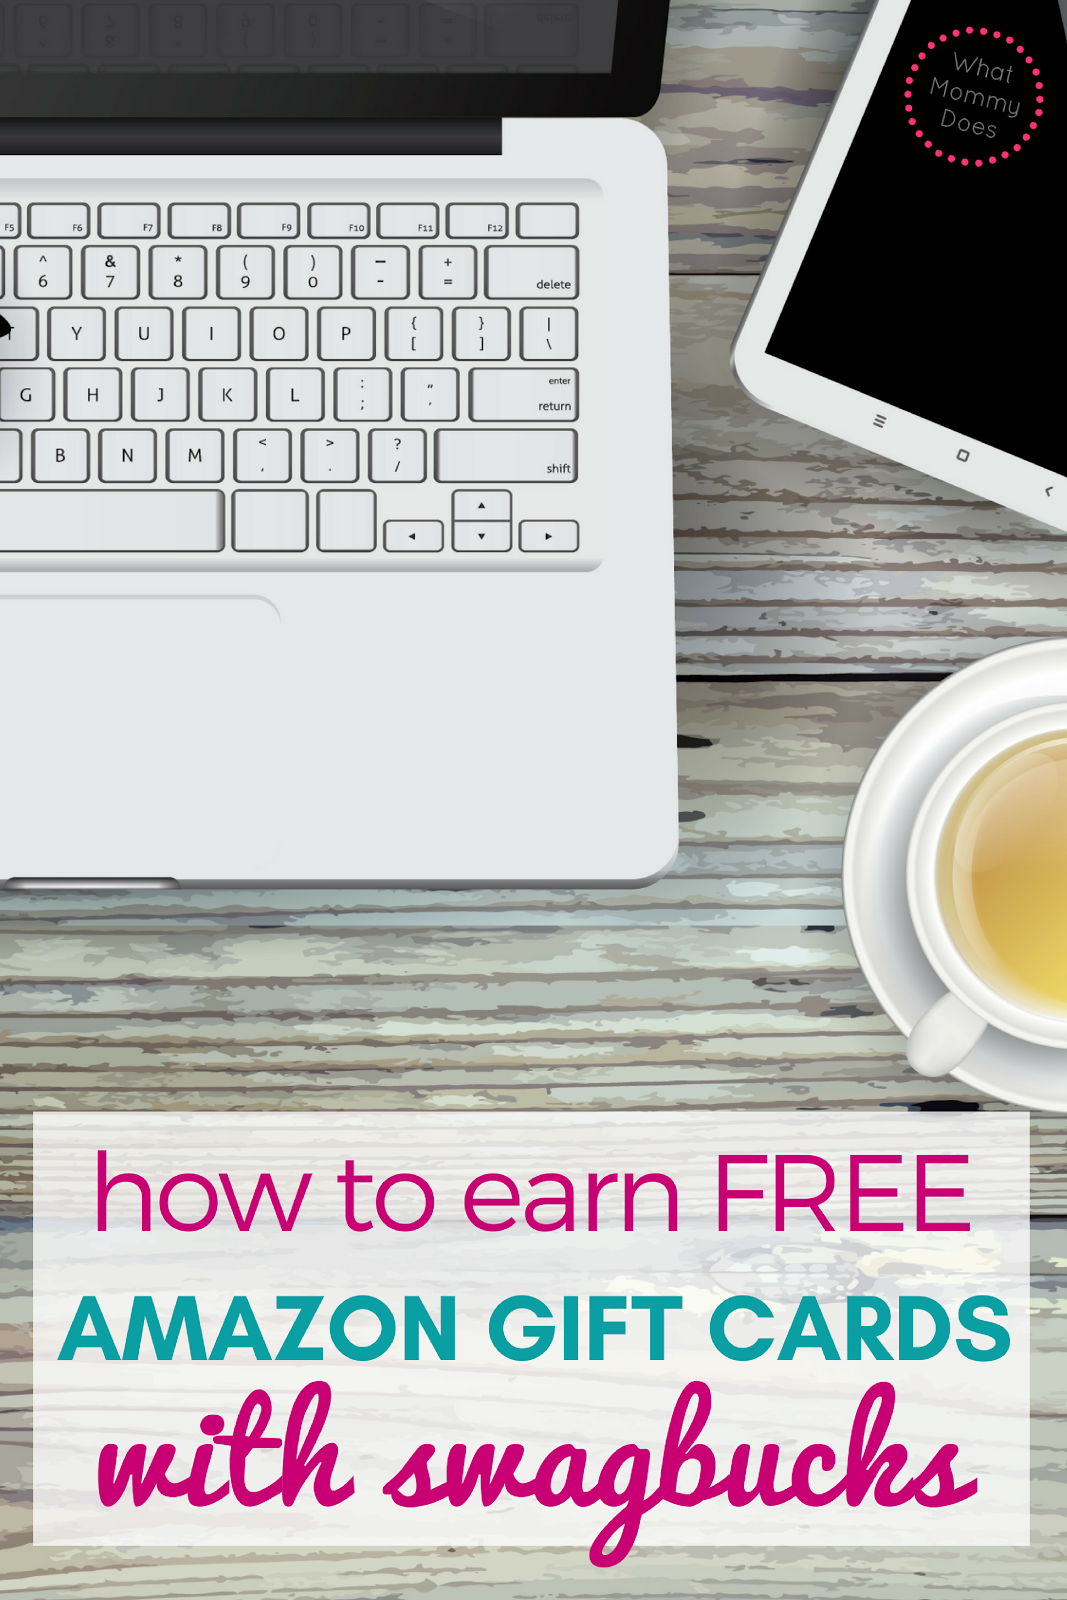 Learn how you can get FREE Amazon gift cards by using Swagbucks. These Swagbucks tips will help you get the gift cards you can use on anything on Amazon!